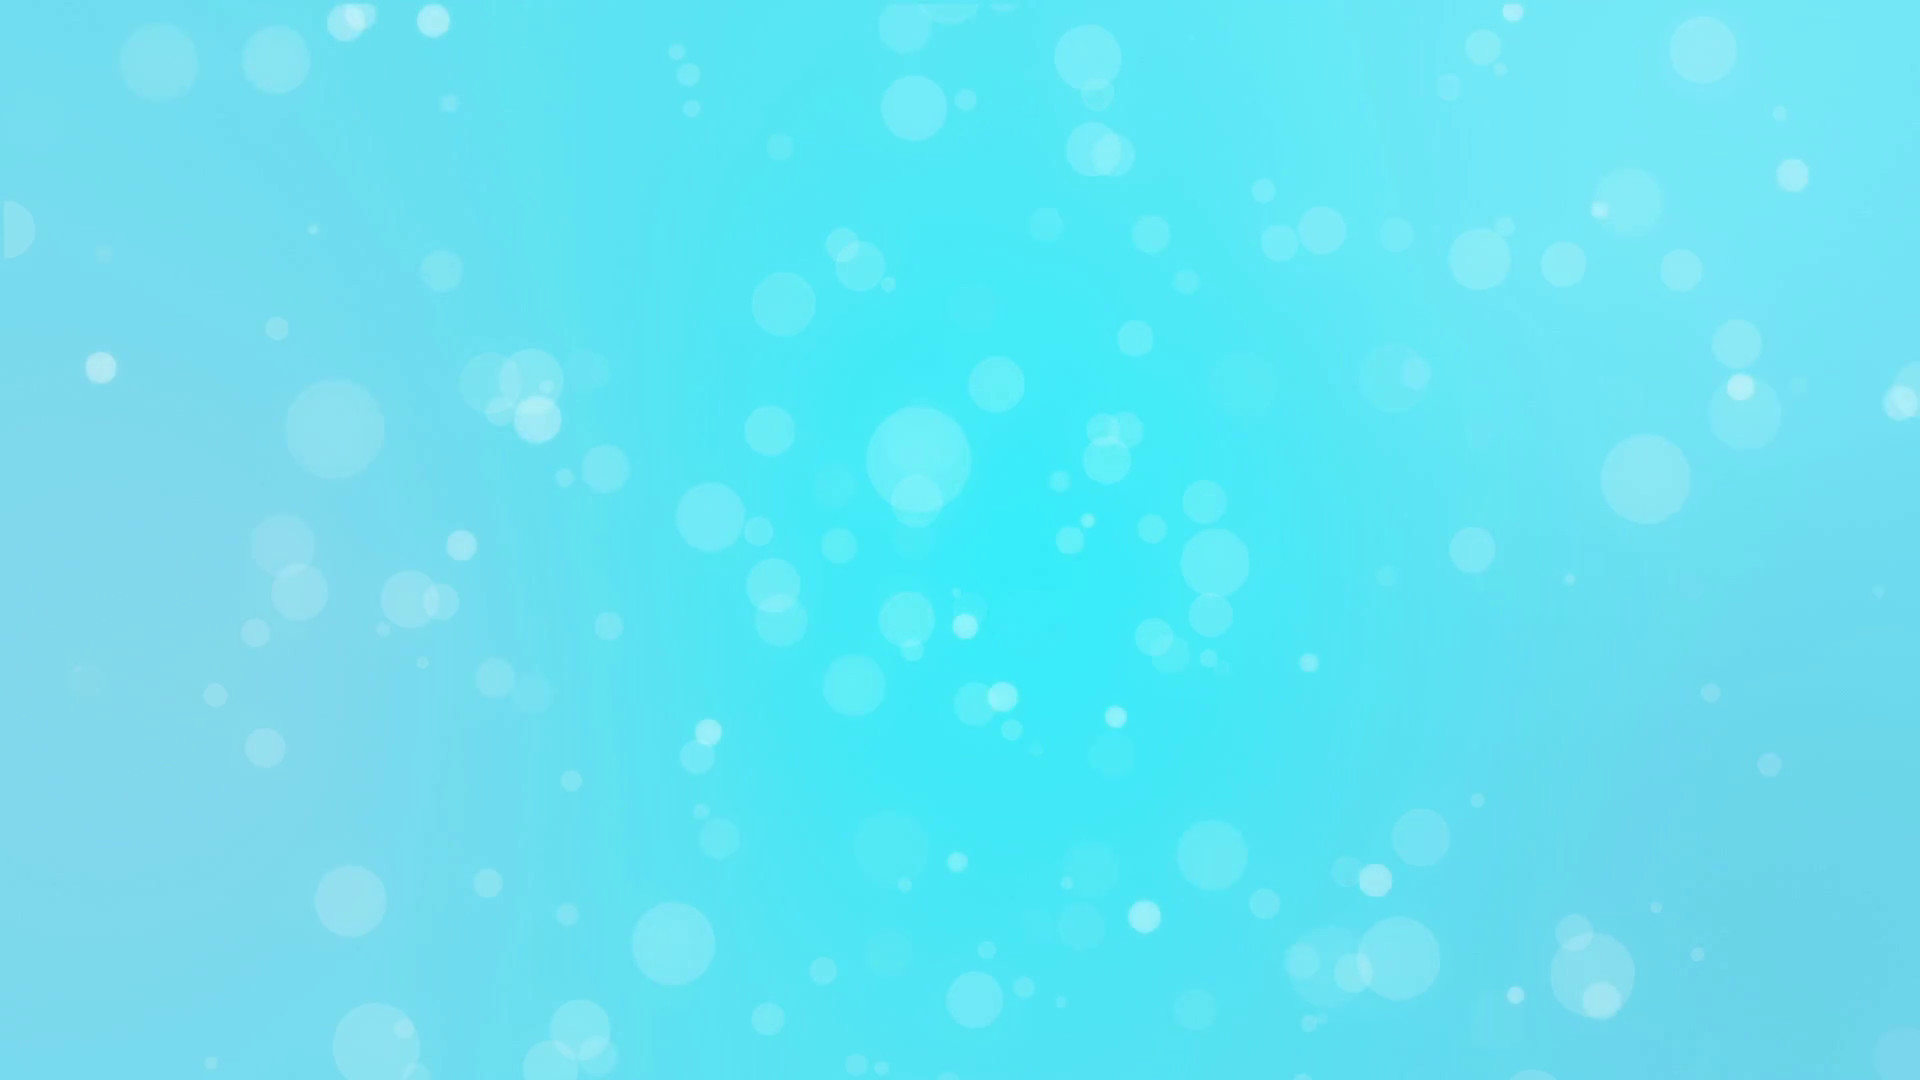 1920x1080 Glowing abstract holiday background with white bokeh lights flickering on  blue gradient backdrop Motion Background - VideoBlocks